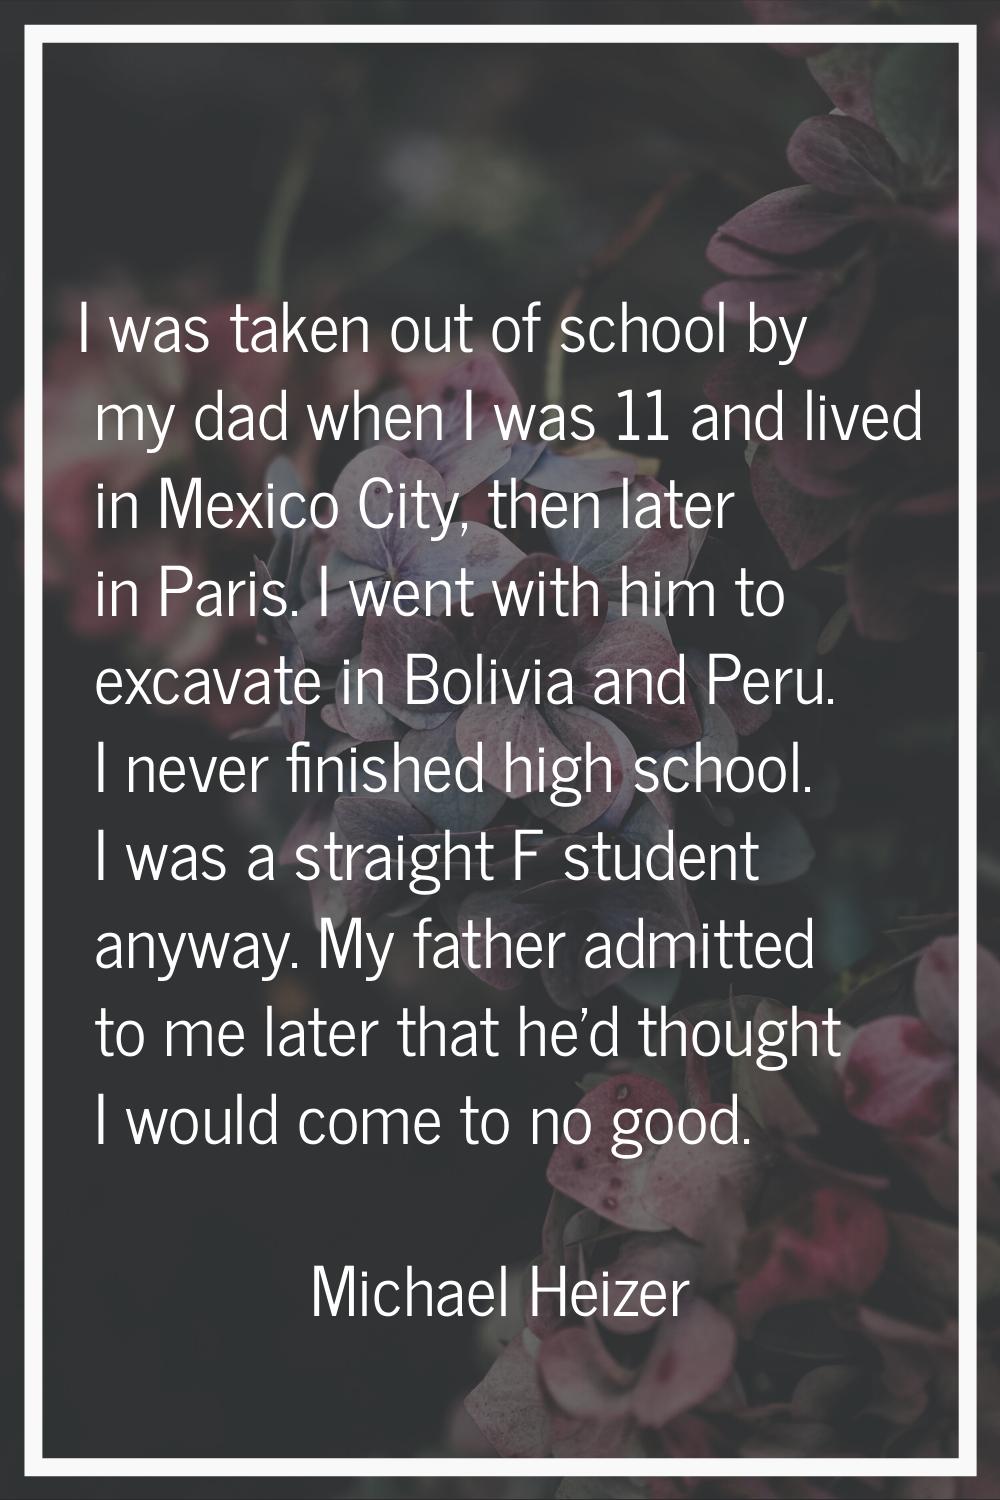 I was taken out of school by my dad when I was 11 and lived in Mexico City, then later in Paris. I 